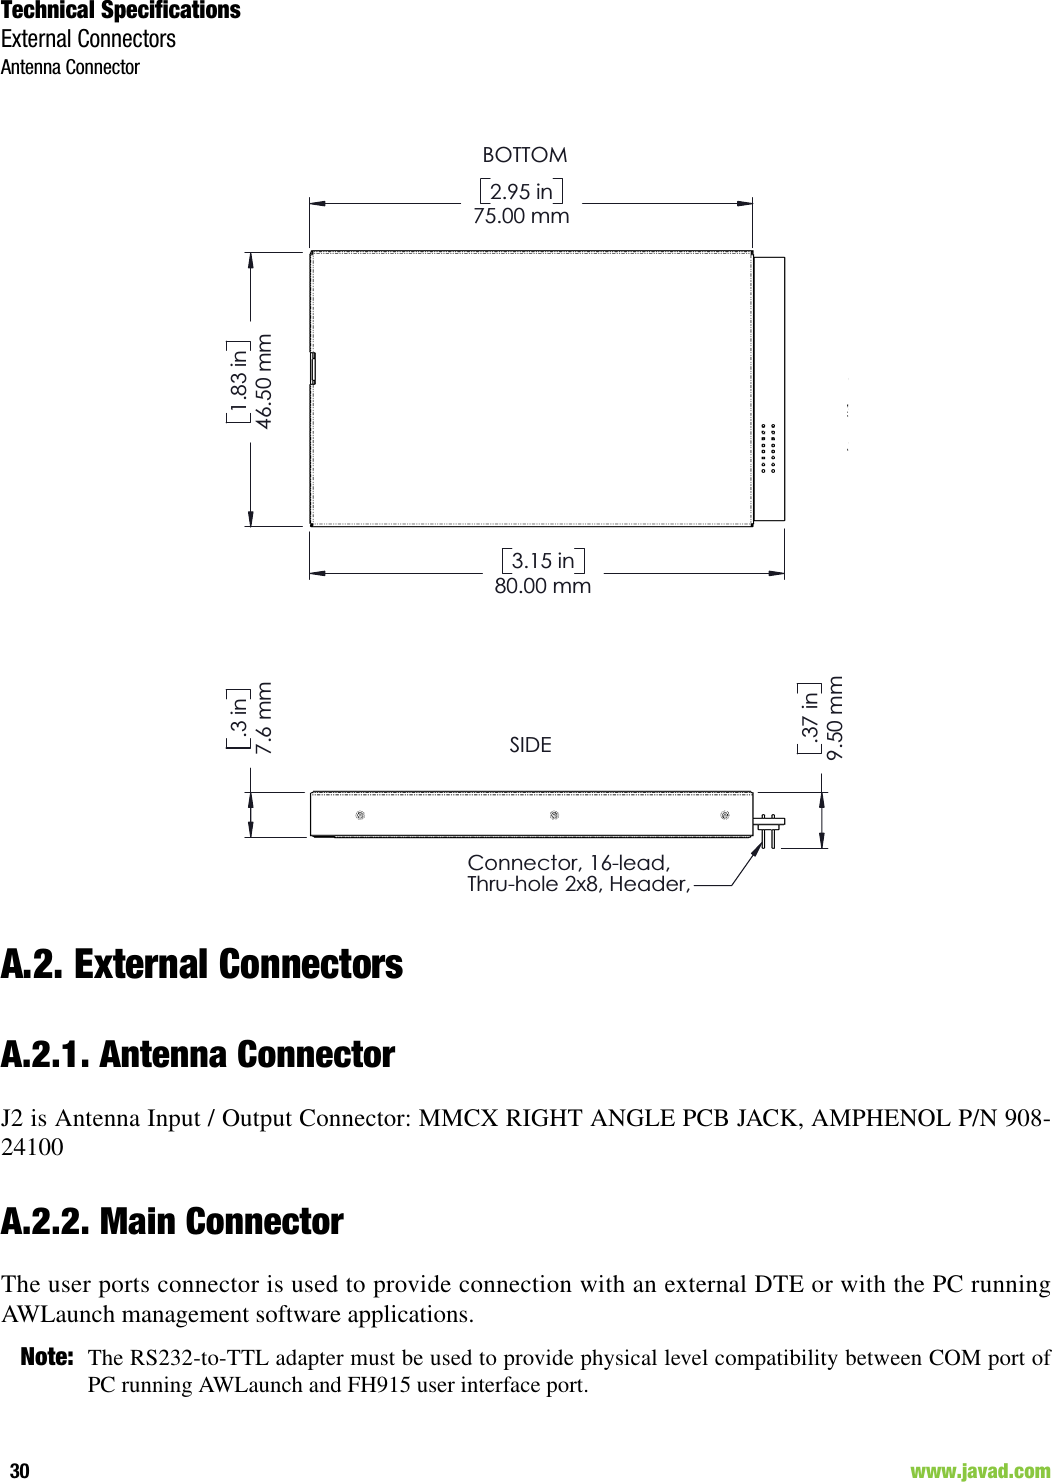 Technical SpecificationsExternal ConnectorsAntenna Connector30                                                                                                                     www.javad.comA.2. External ConnectorsA.2.1. Antenna ConnectorJ2 is Antenna Input / Output Connector: MMCX RIGHT ANGLE PCB JACK, AMPHENOL P/N 908-24100A.2.2. Main ConnectorThe user ports connector is used to provide connection with an external DTE or with the PC runningAWLaunch management software applications.Note: The RS232-to-TTL adapter must be used to provide physical level compatibility between COM port ofPC running AWLaunch and FH915 user interface port.9.50 mm.37 in7.6 mm.3 inConnector, 16-lead,Thru-hole 2x8, Header,&quot;.050&quot;75.00 mm2.95 in46.50 mm1.83 in80.00 mm3.15 inBOTTOMSIDE9.50 mm.37 in7.6 mm.3 inConnector, 16-lead,Thru-hole 2x8, Header,75.00 mm2.95 in46.50 mm1.83 in80.00 mm3.15 inBOTTOMSIDE